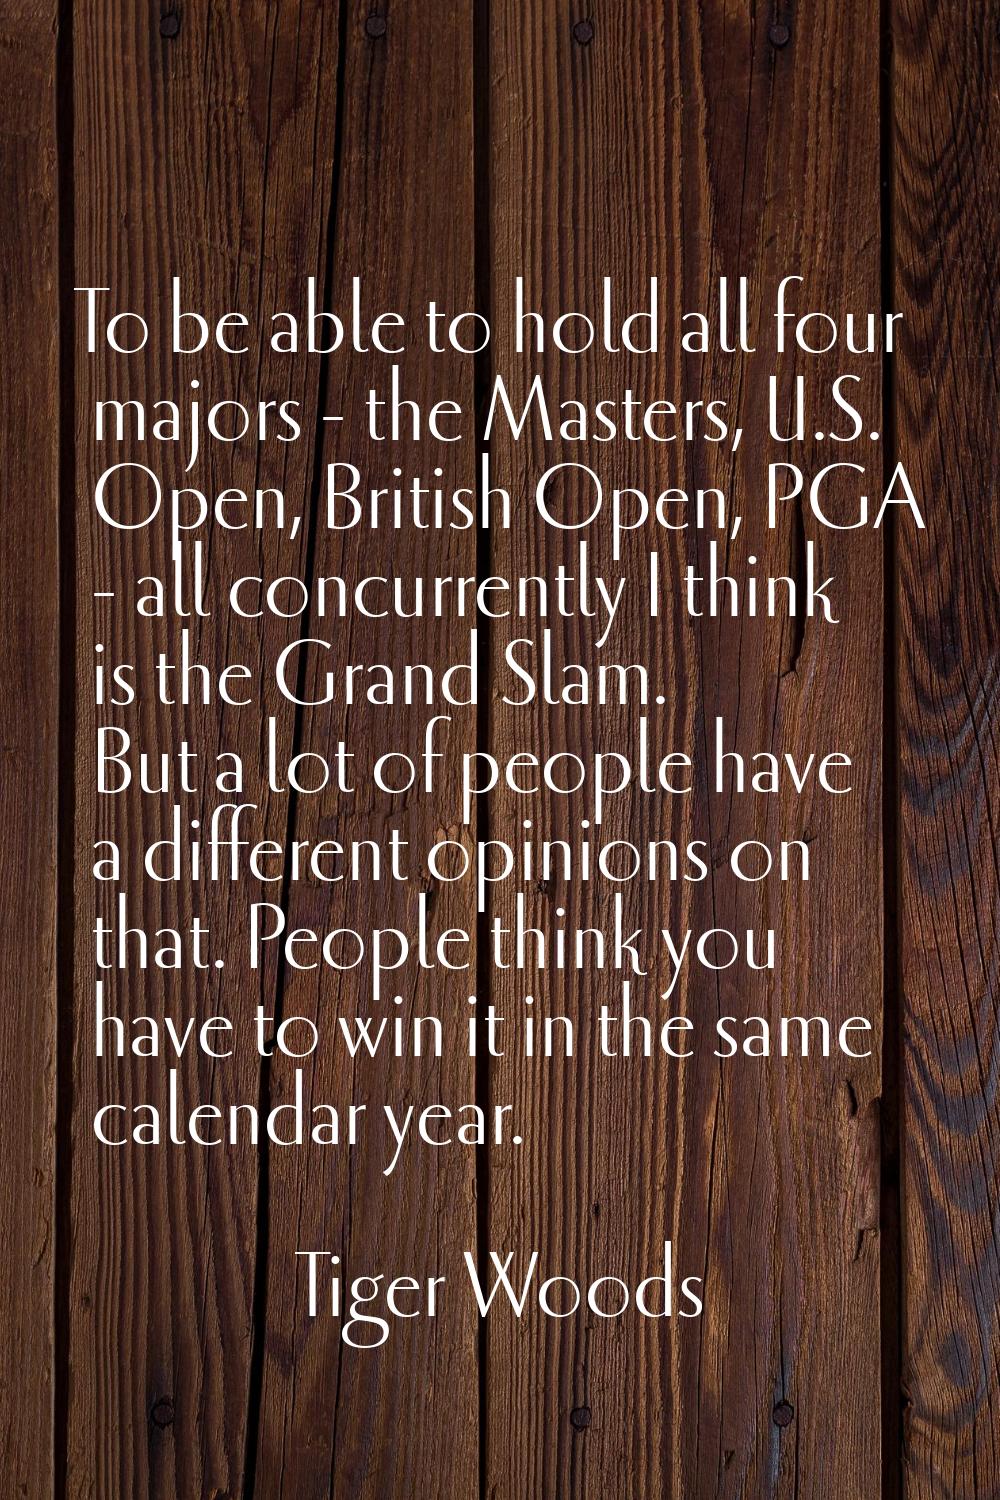 To be able to hold all four majors - the Masters, U.S. Open, British Open, PGA - all concurrently I